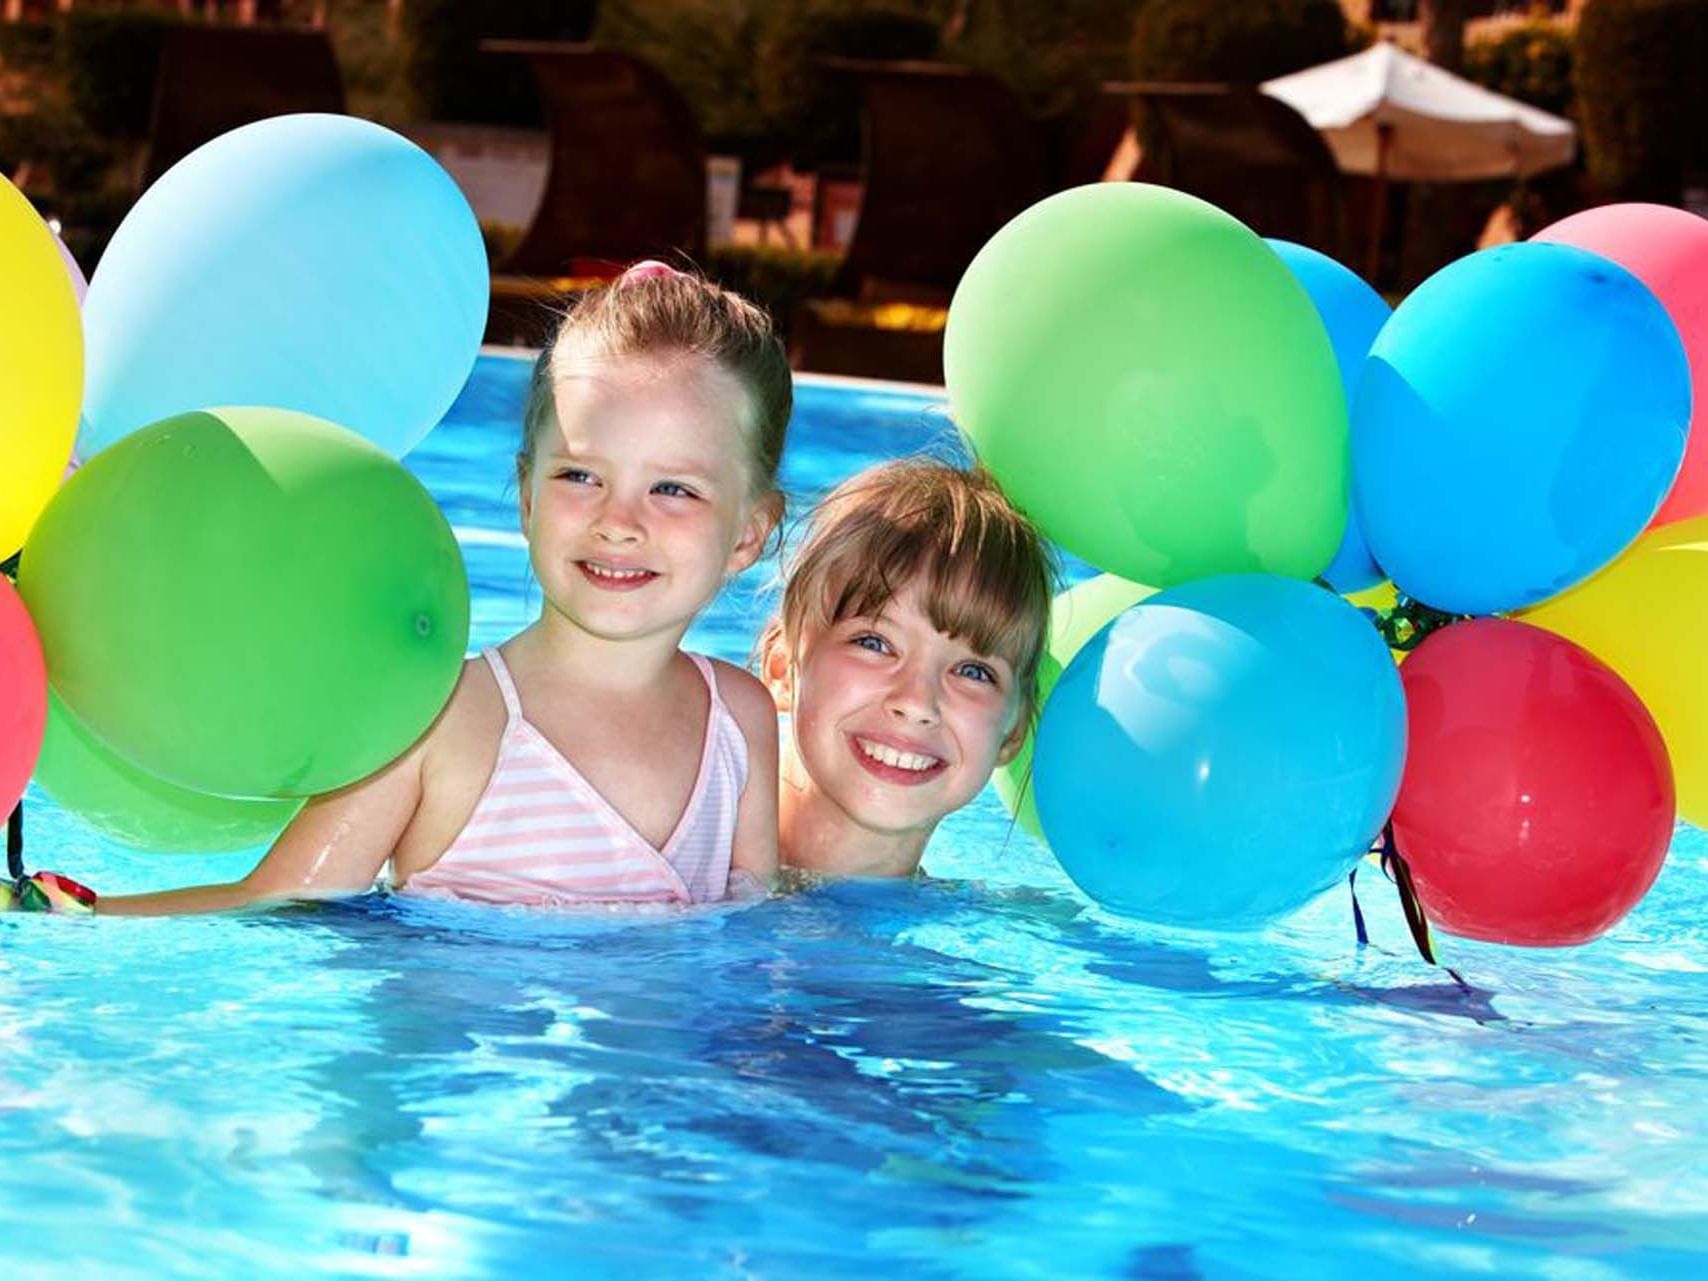 Kids playing in the pool with balloons at Grand Coloane Resort